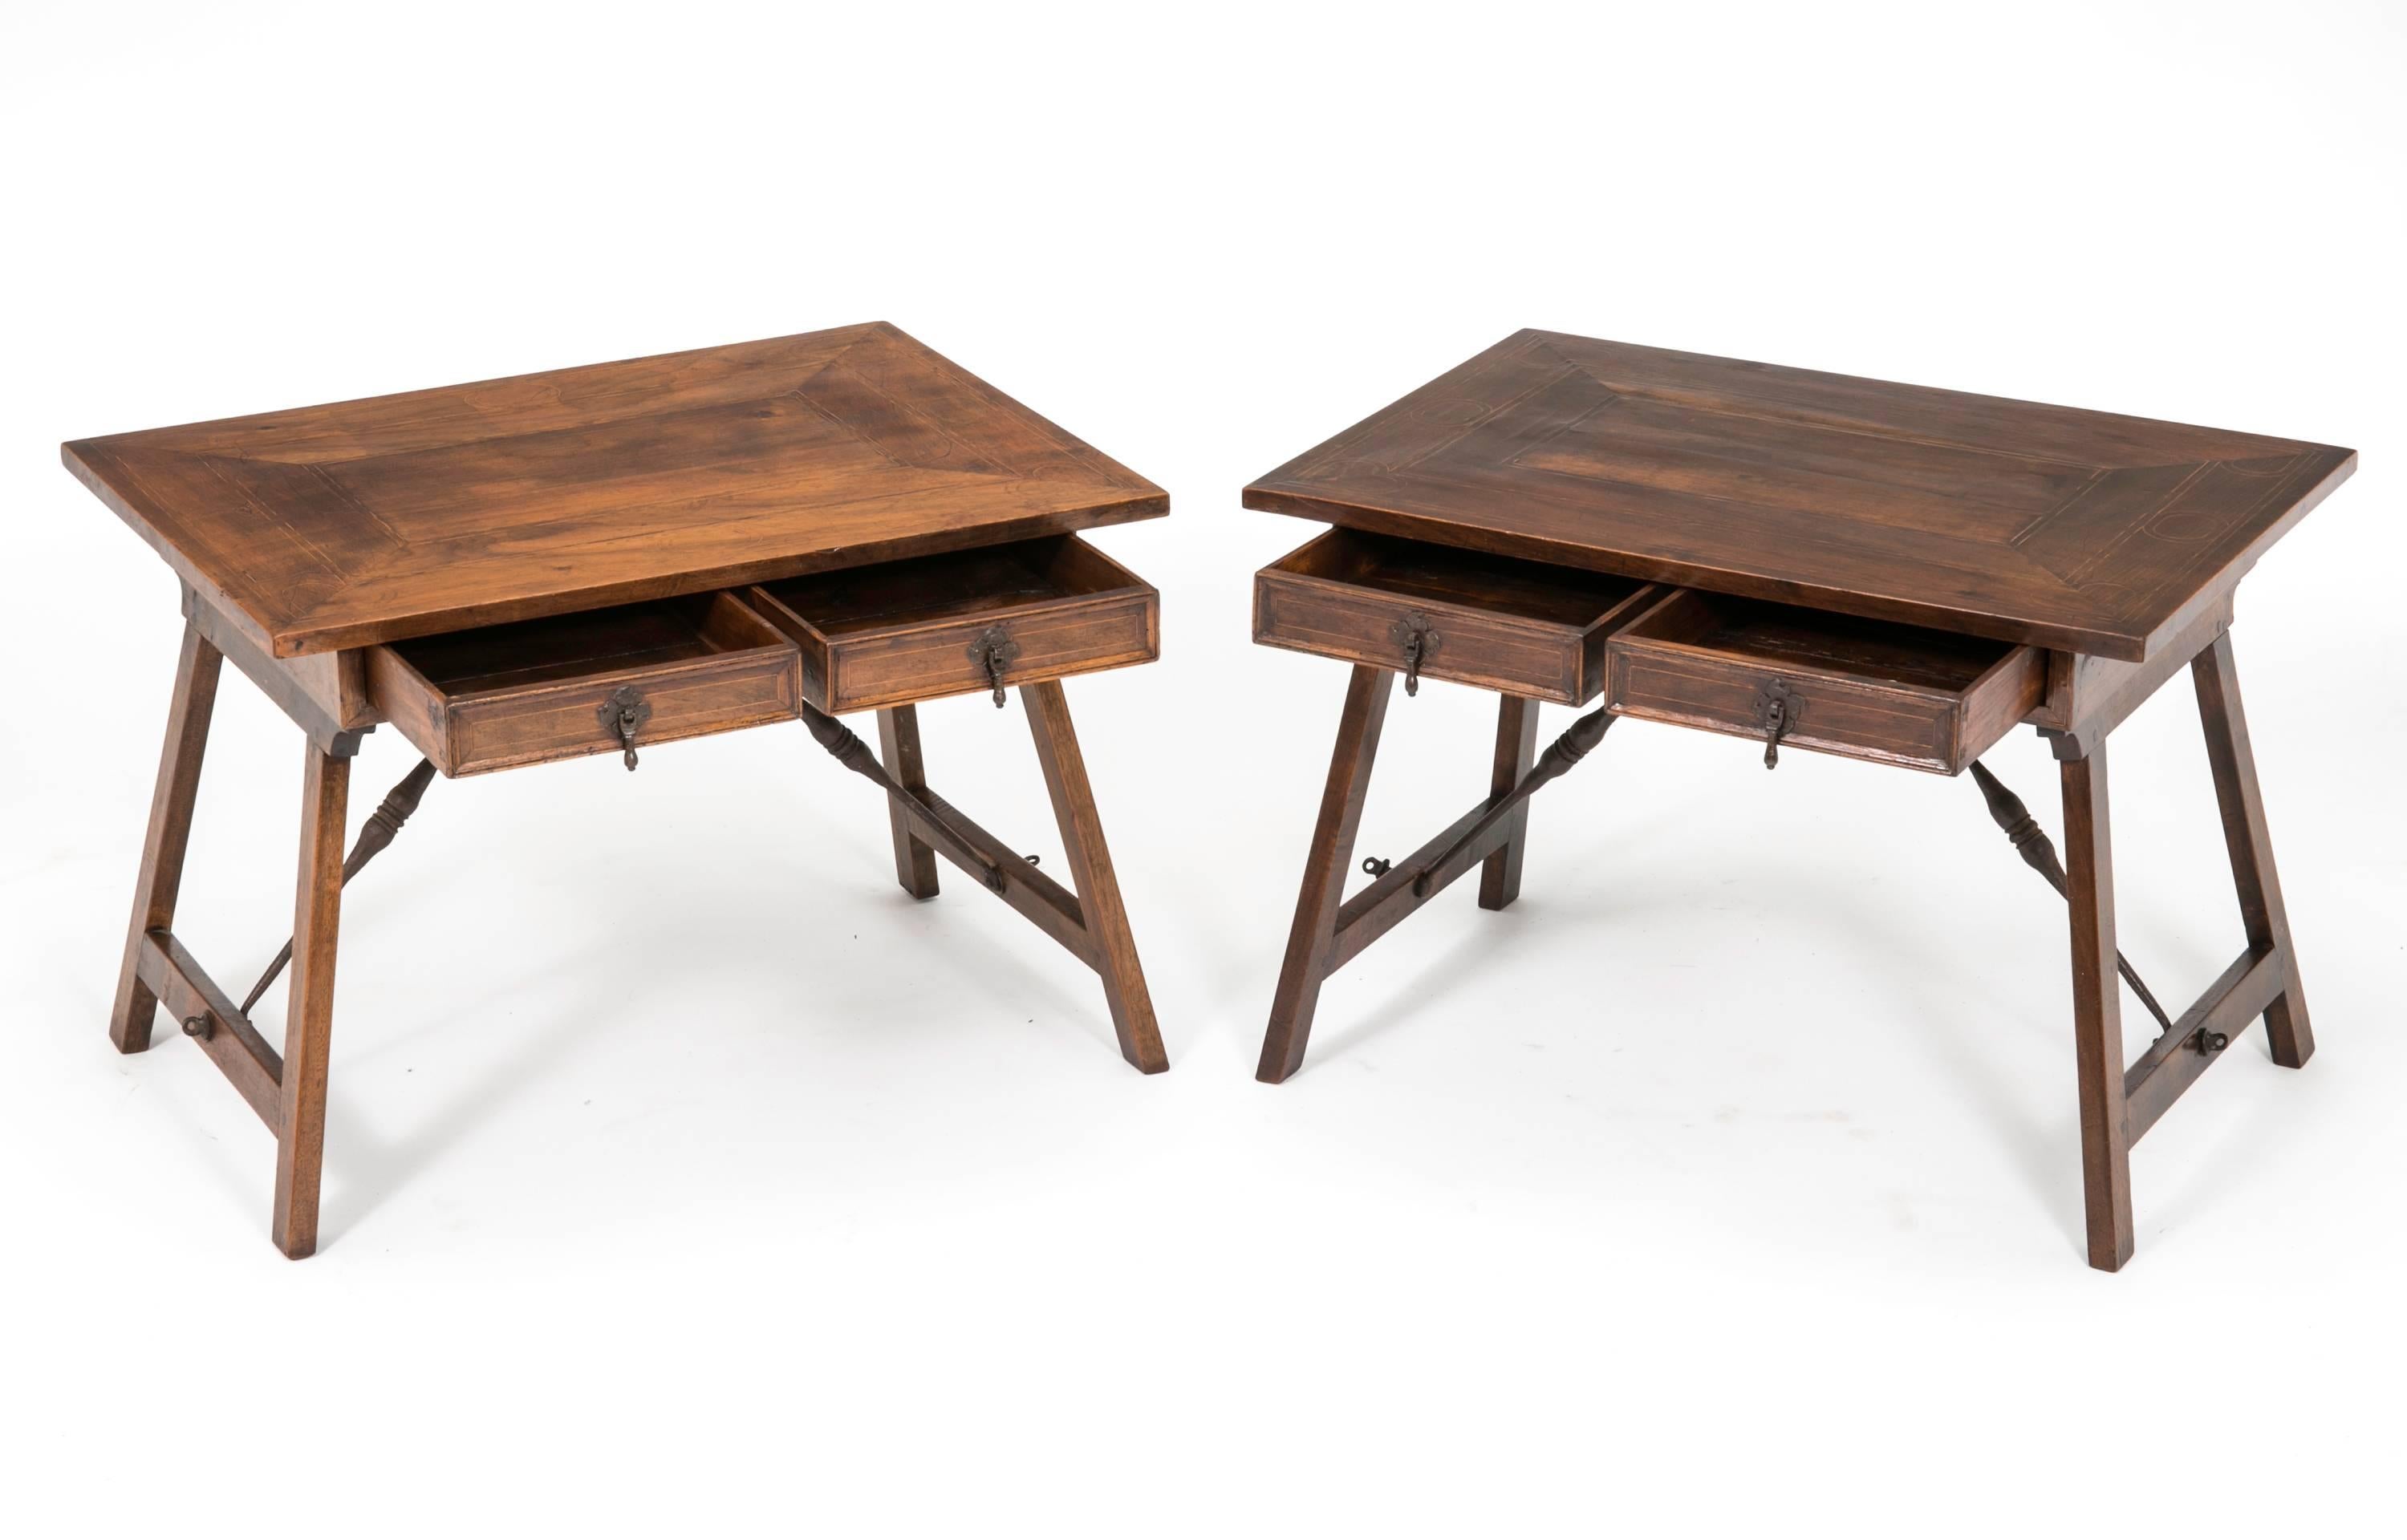 From early 1900s, pair of charming English walnut wood side tables. Each table has two small drawers, supported by iron stretchers. The stretchers are hinged so that the legs will fold down for storage or moving. Great as side tables or cocktail